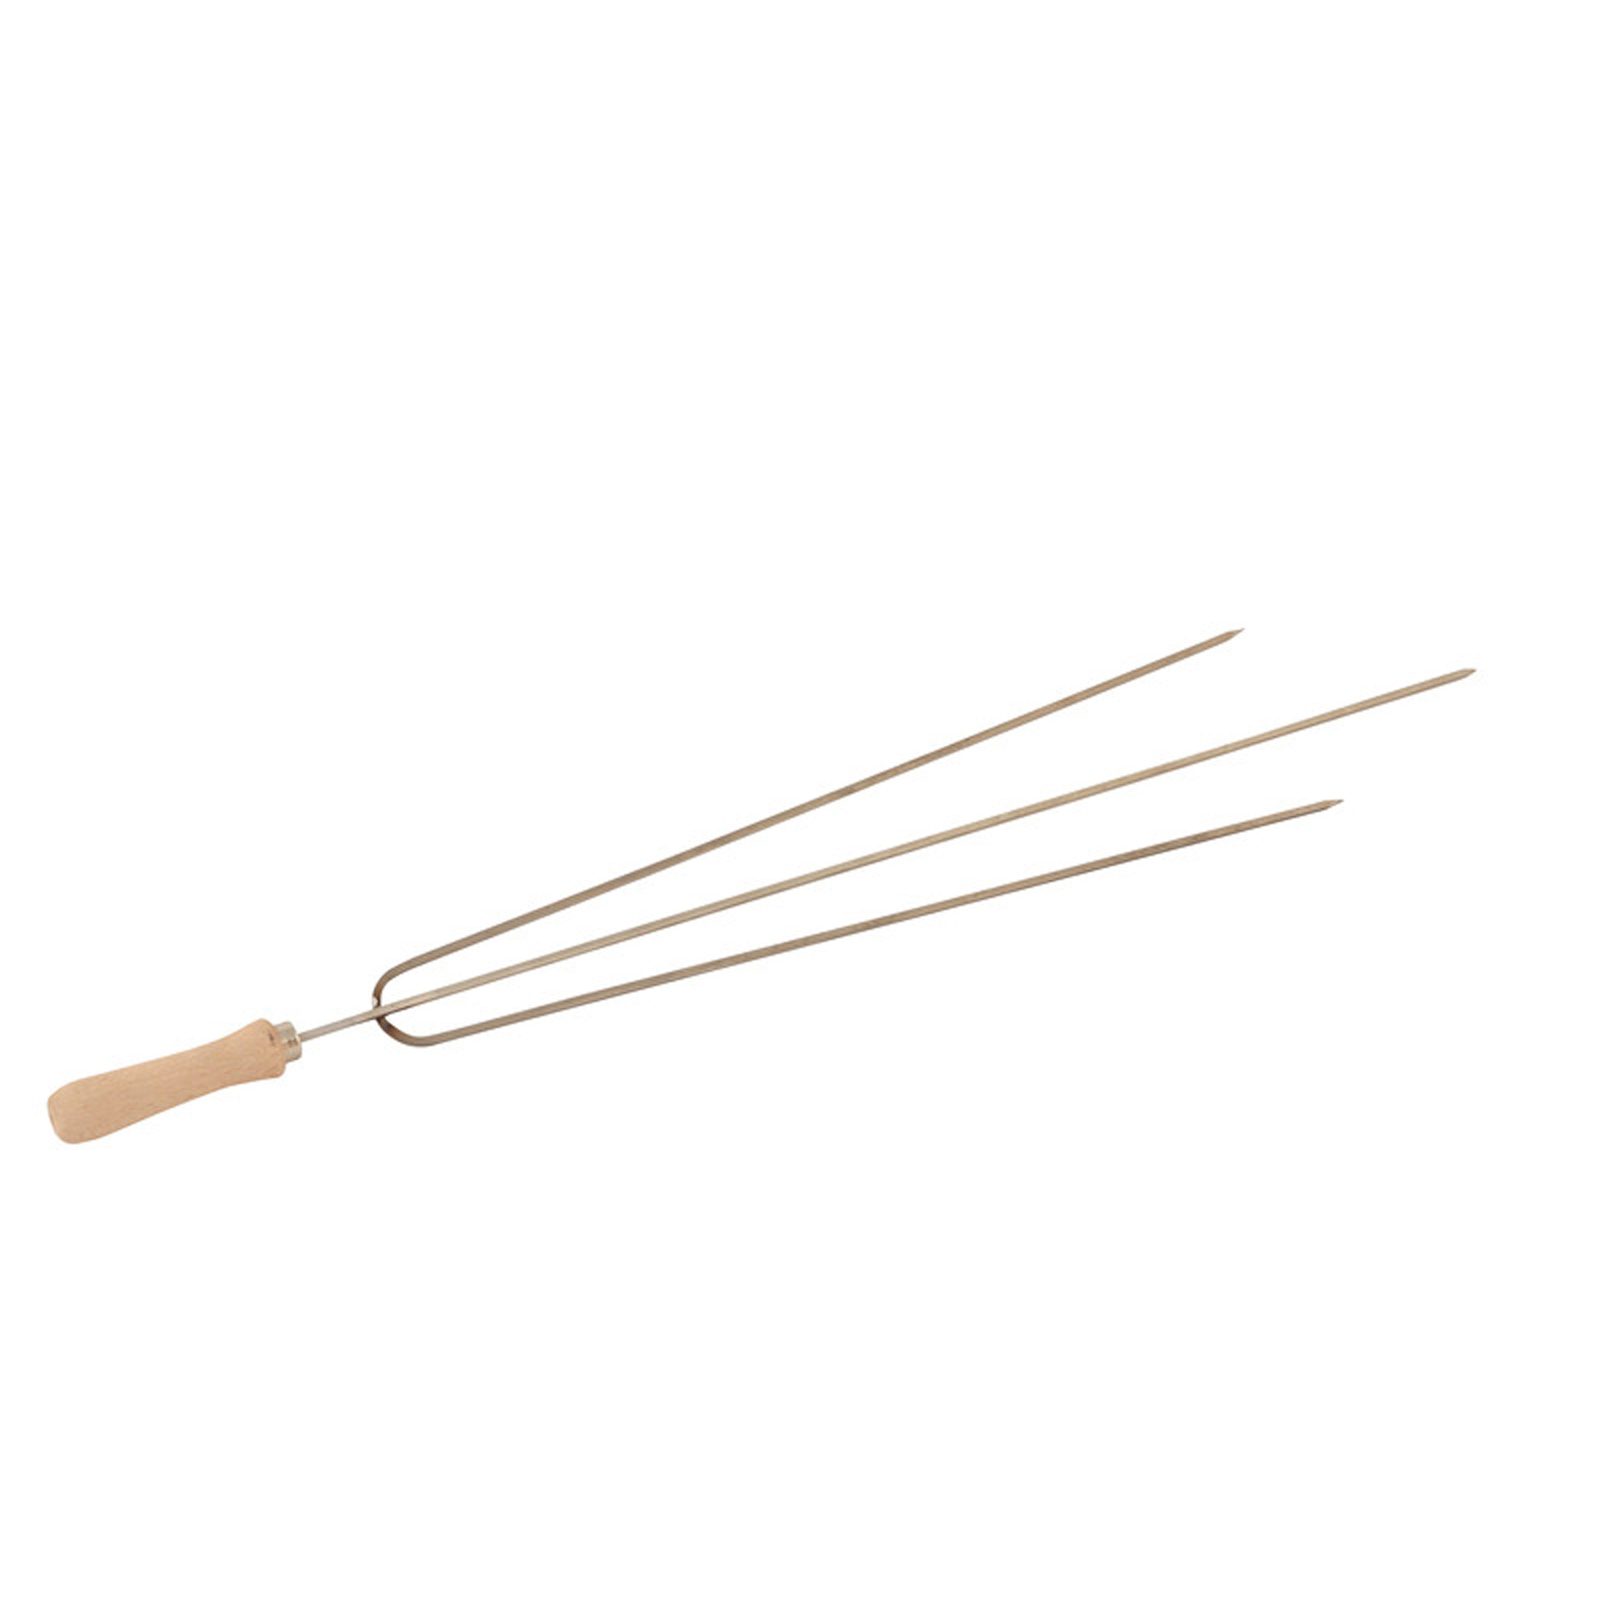 Cyprus Grill 3 Prong Stainless Steel Skewer (each) for the Modern Cyprus Grill Rotisserie - PSS-1010